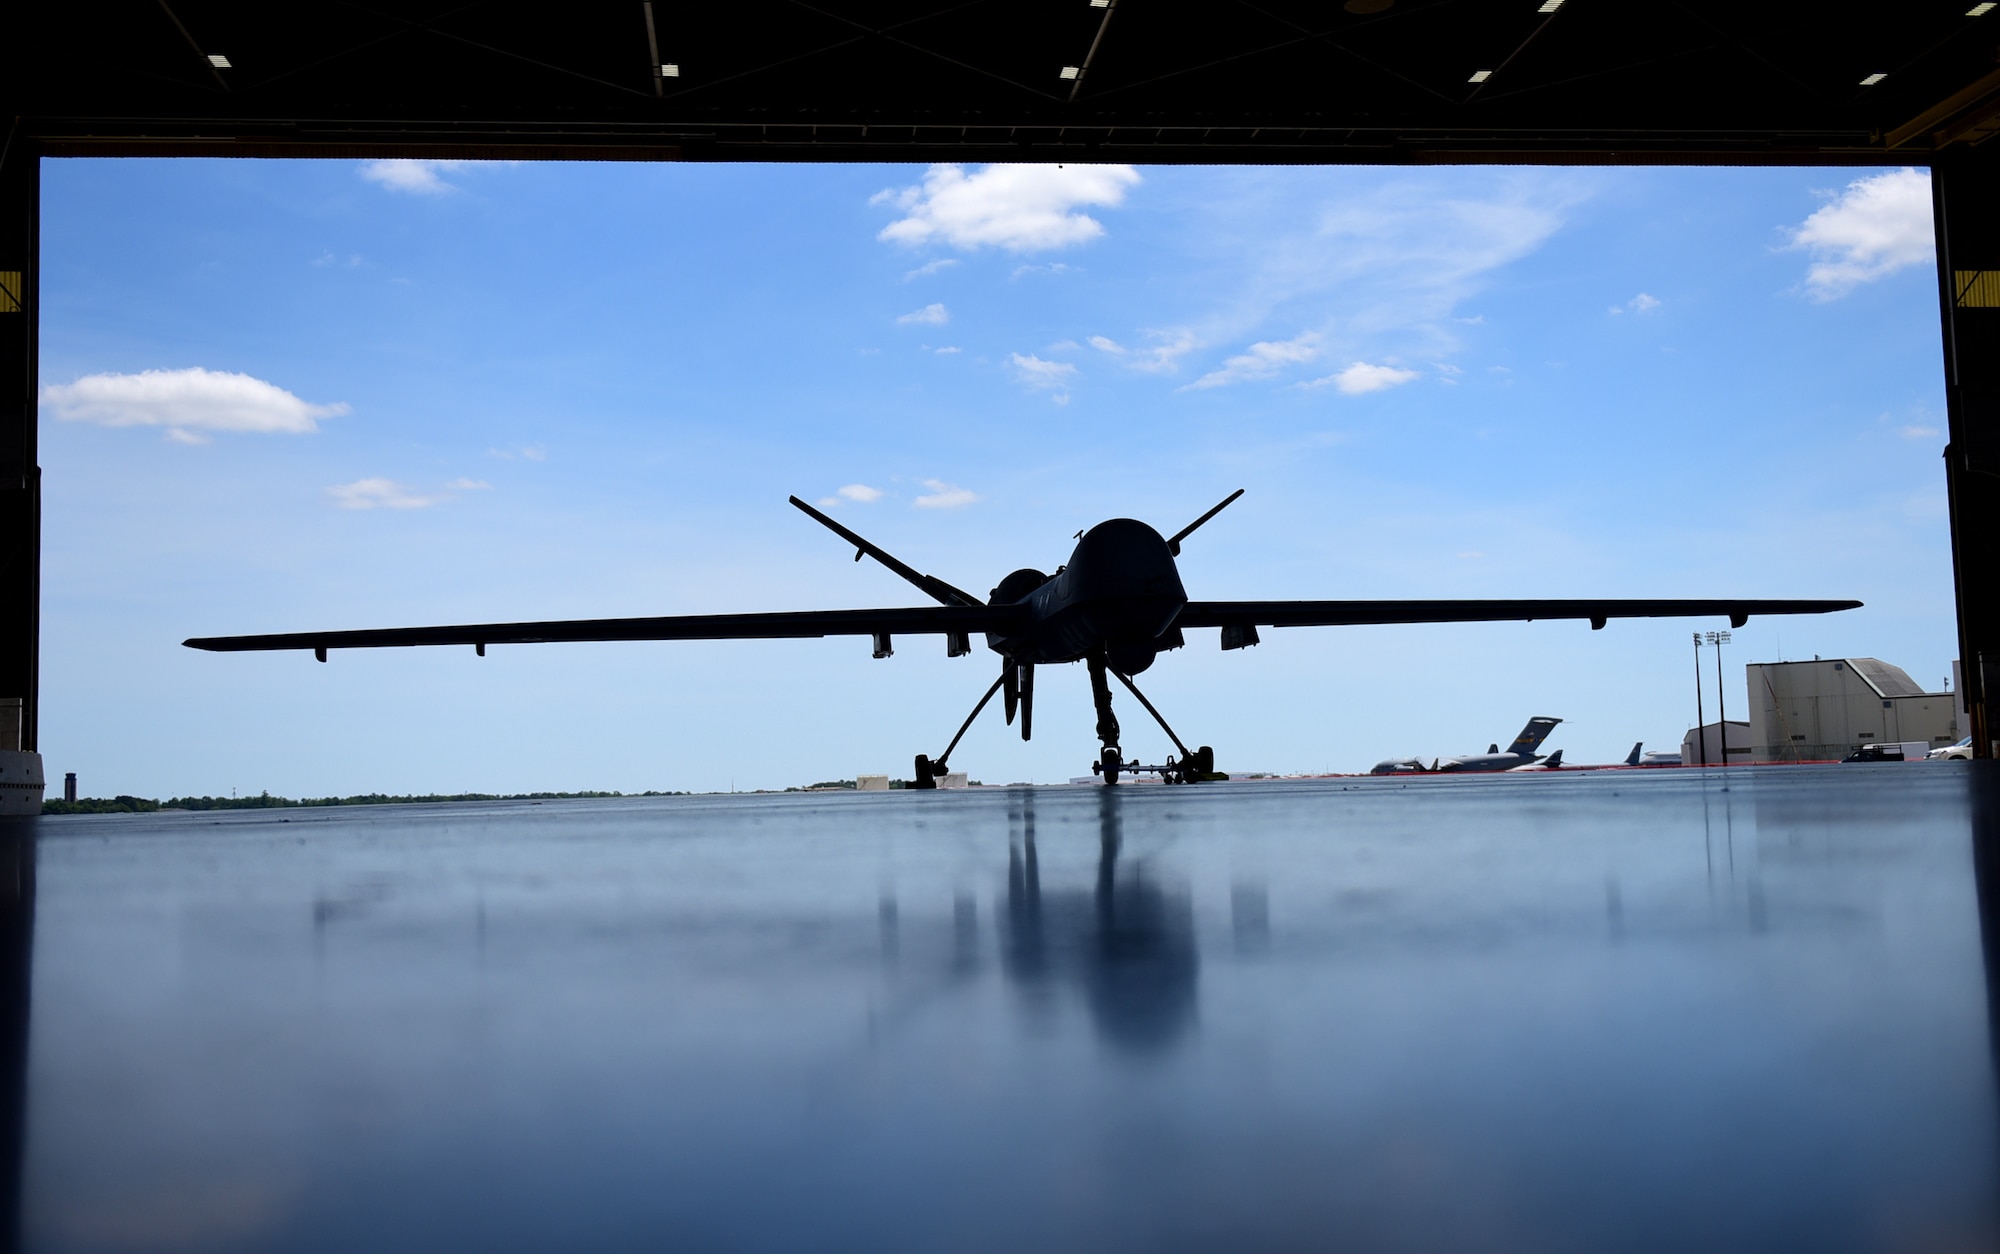 The MQ-9 Reaper is prepared for the Joint Base Charleston Air & Space Expo April 26, 2018, at JB Charleston, S.C. The air show took place from April 27-28, 2018 and hosted more than 80,000 attendees. (U.S. Air Force photo by Senior Airman Christian Clausen)